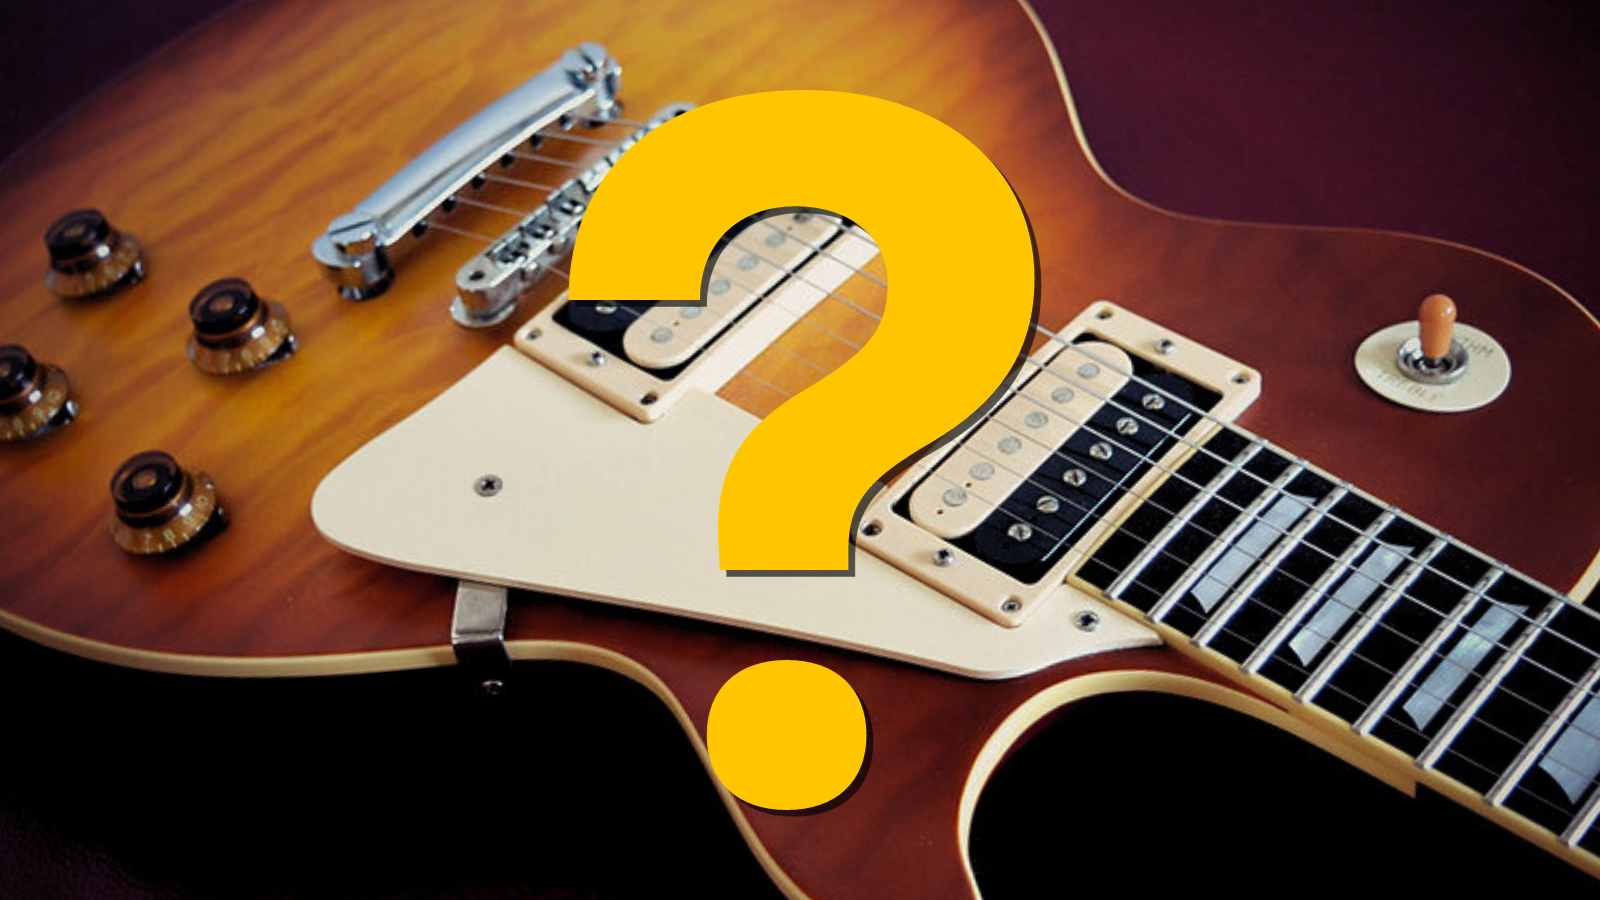 5 Misconceptions About Guitar Modding That We Need To Clear Up